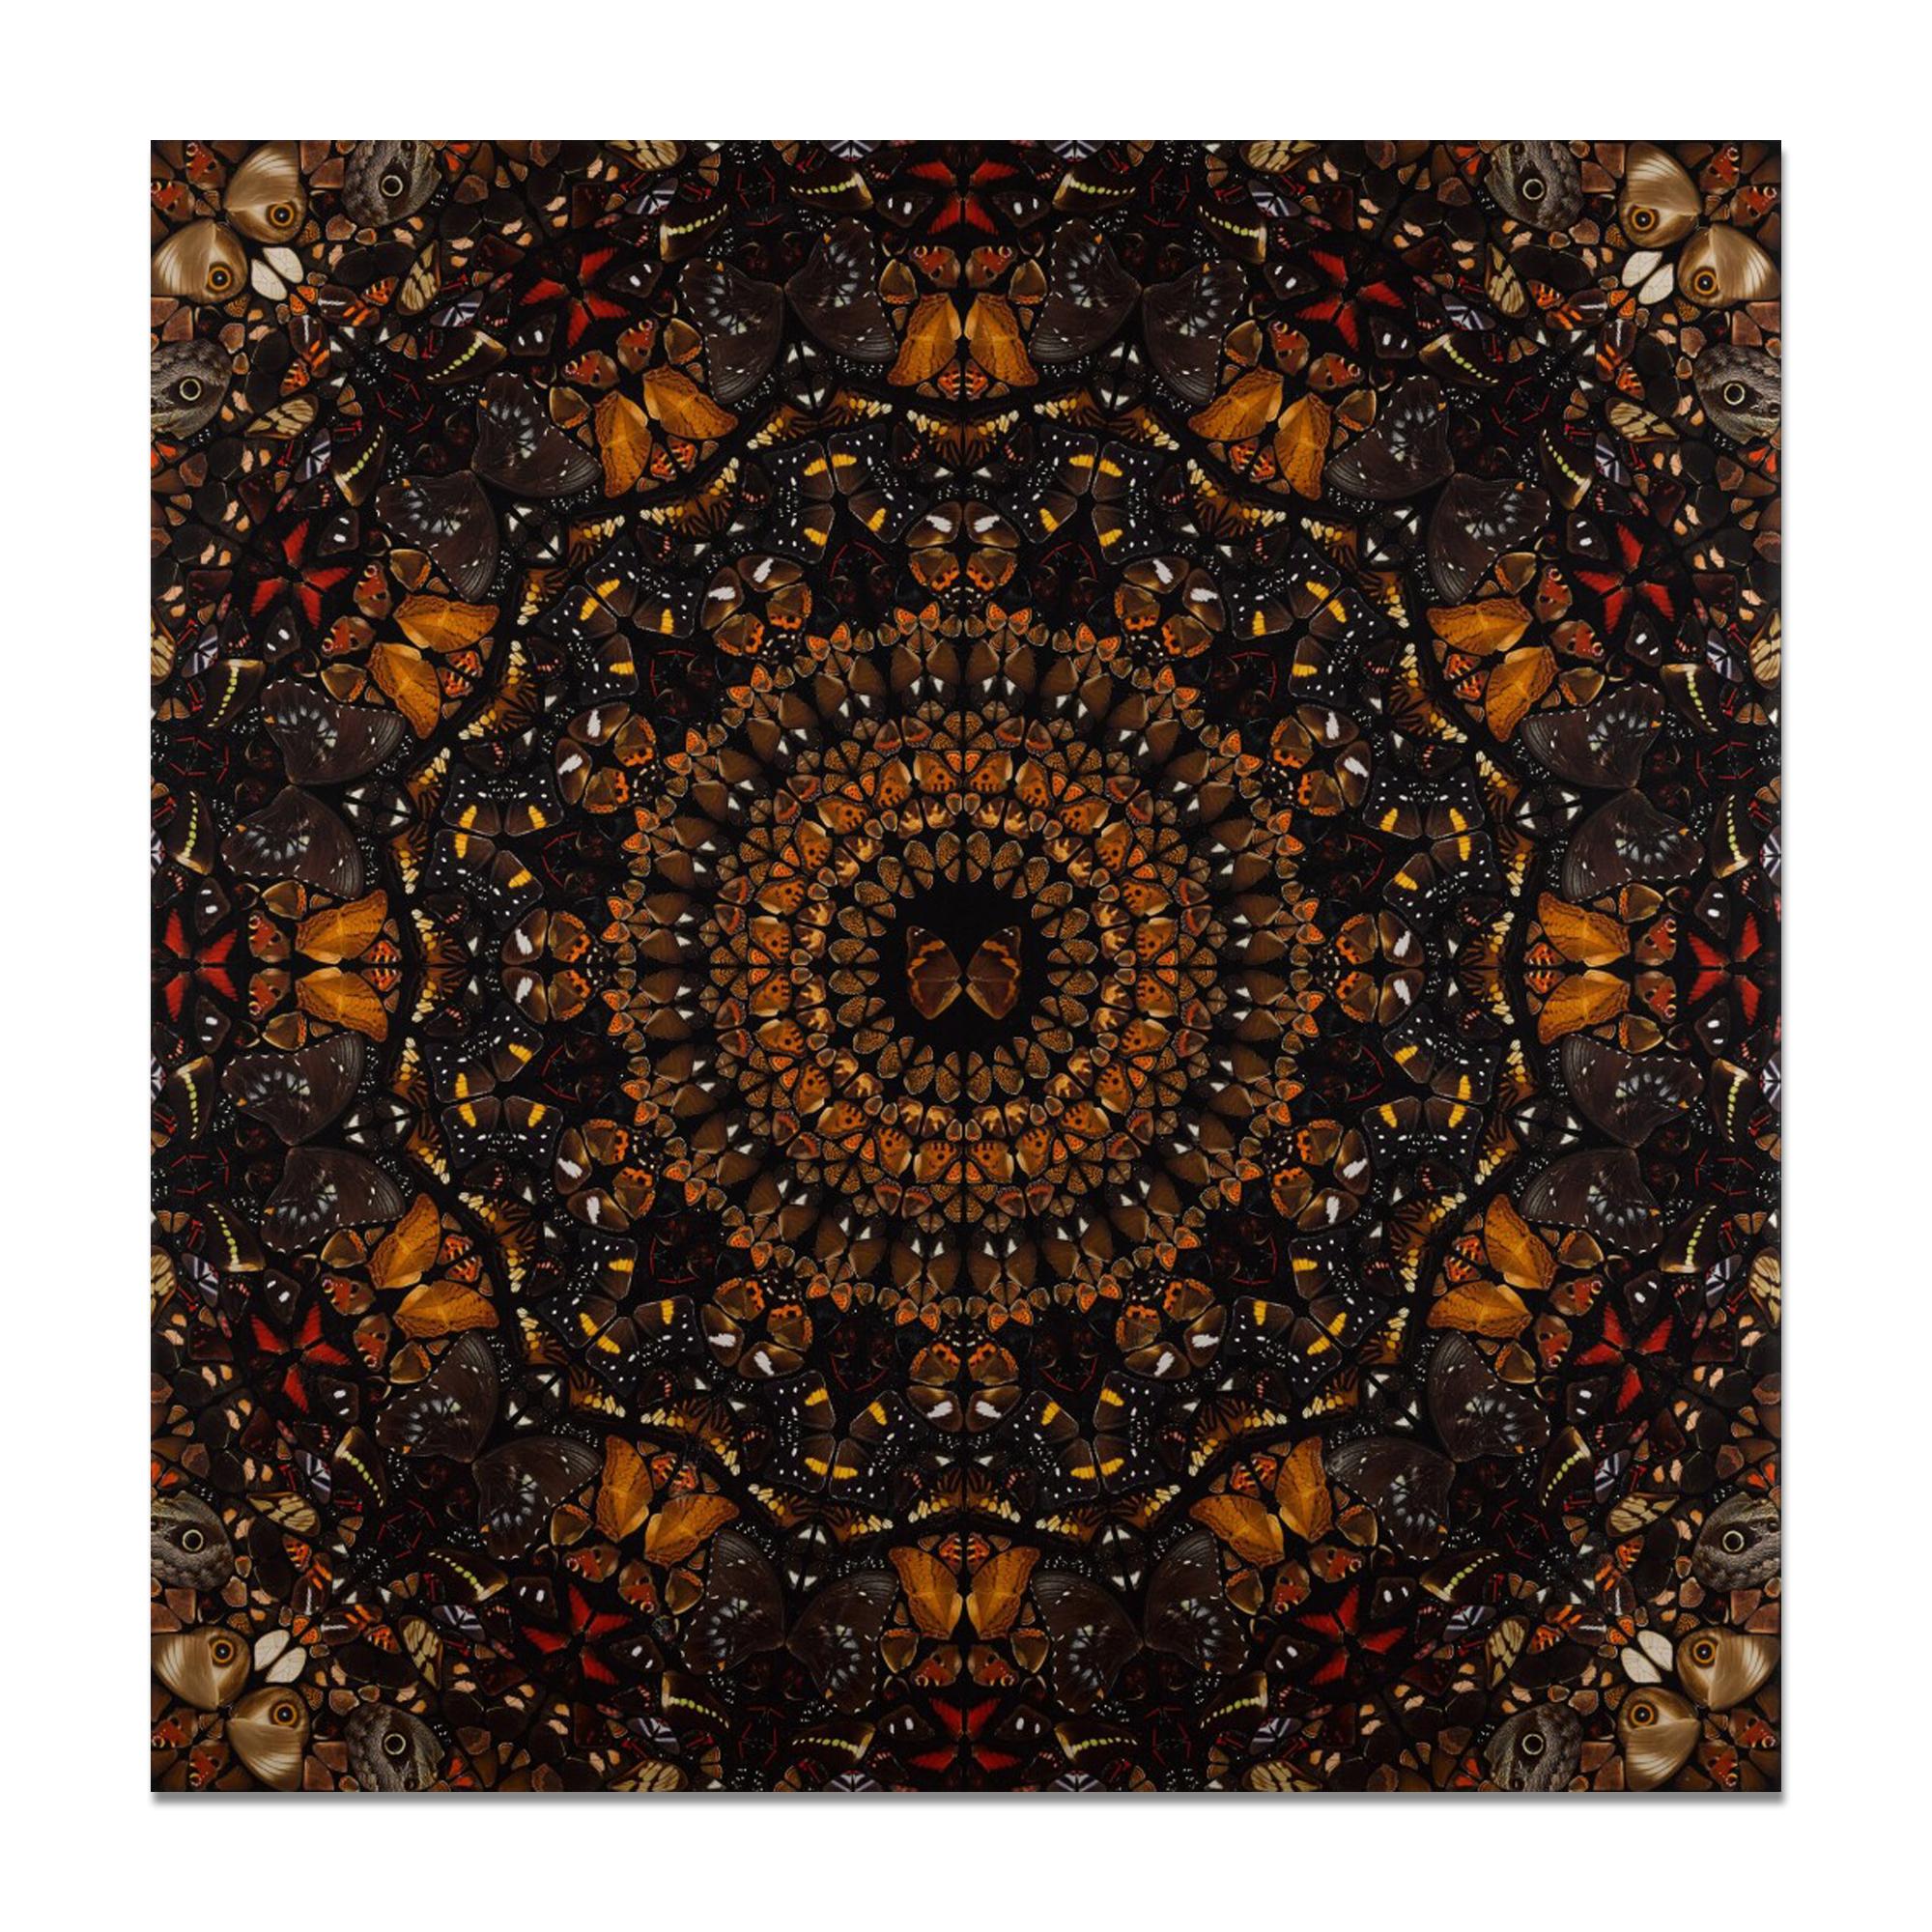 Damien Hirst (British, born 1965)
Earth (from The Elements, H6-6), 2020
Medium: Diasec-mounted giclée print on aluminium composite panel
Dimensions: 100 x 100 cm (39 3/8 x 39 3/8 in)
Edition of 60: Hand signed and numbered
Publisher: HENI